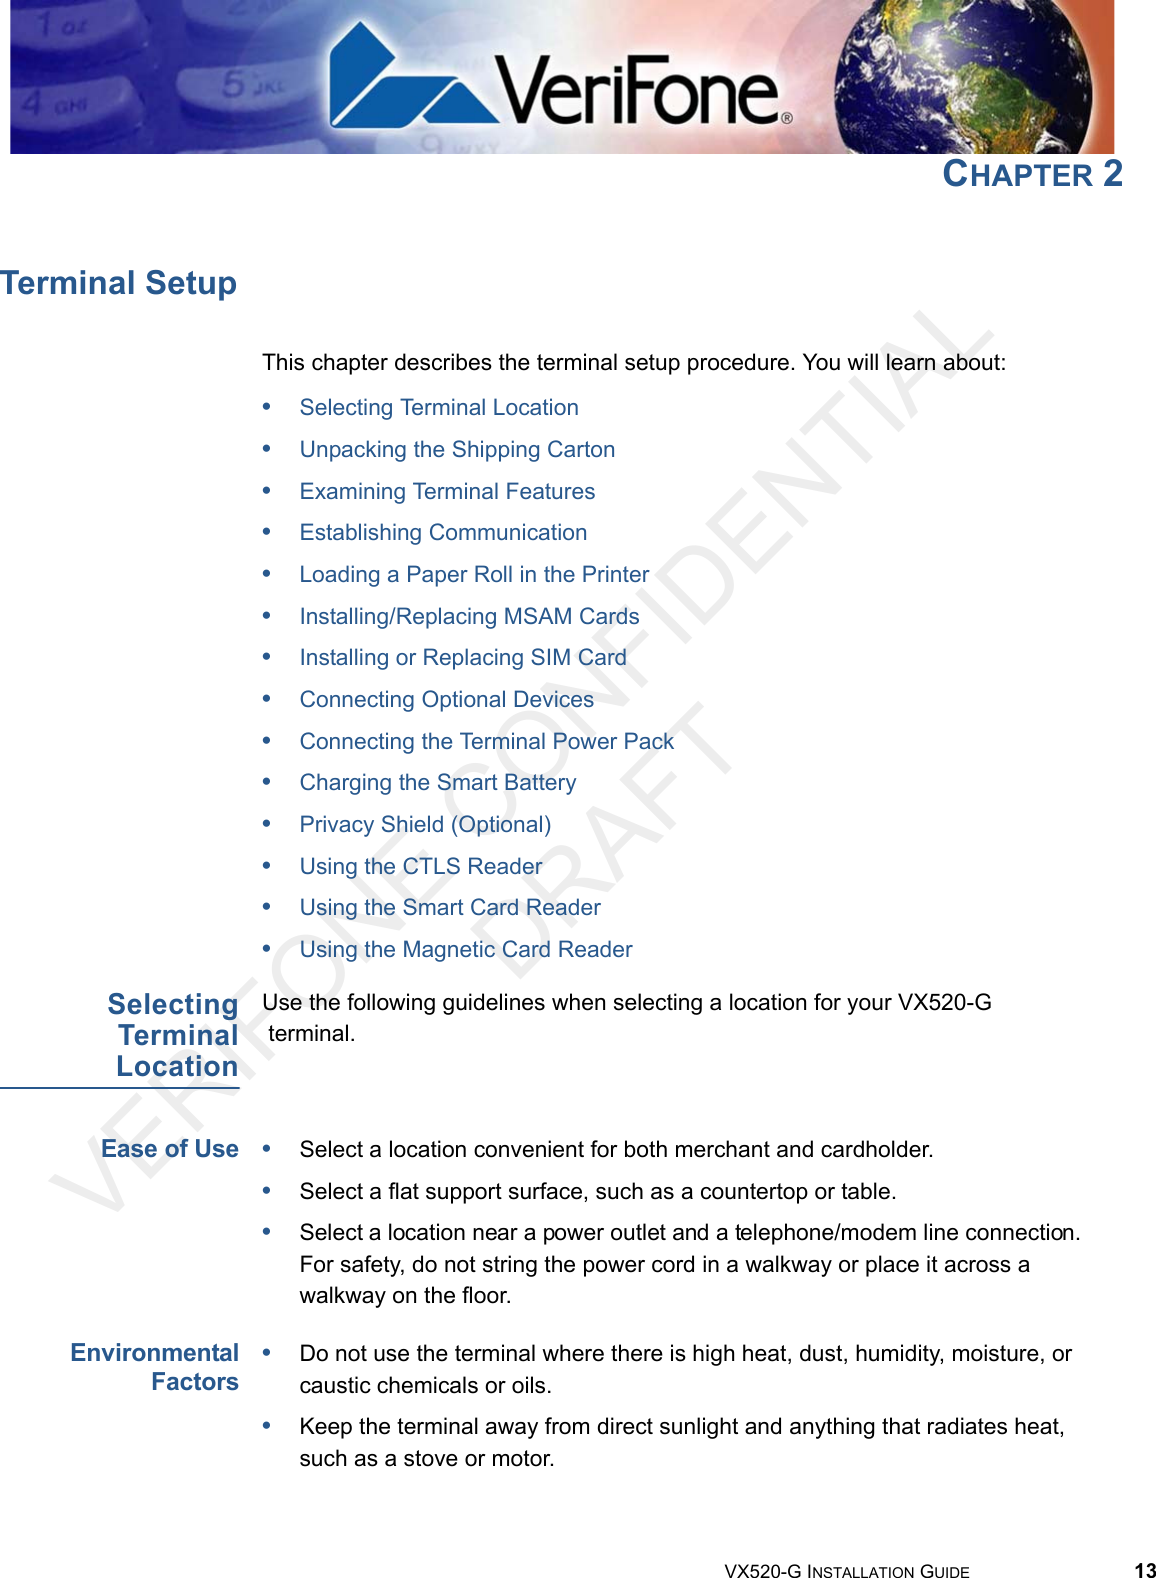 VERIFONE CONFIDENTIAL DRAFTVX520-G INSTALLATION GUIDE 13CHAPTER 2Terminal SetupThis chapter describes the terminal setup procedure. You will learn about: •Selecting Terminal Location•Unpacking the Shipping Carton•Examining Terminal Features•Establishing Communication•Loading a Paper Roll in the Printer•Installing/Replacing MSAM Cards•Installing or Replacing SIM Card•Connecting Optional Devices•Connecting the Terminal Power Pack•Charging the Smart Battery•Privacy Shield (Optional)•Using the CTLS Reader•Using the Smart Card Reader•Using the Magnetic Card ReaderSelectingTerminalLocationUse the following guidelines when selecting a location for your VX520-G terminal. Ease of Use•Select a location convenient for both merchant and cardholder.•Select a flat support surface, such as a countertop or table.•Select a location near a power outlet and a telephone/modem line connection. For safety, do not string the power cord in a walkway or place it across a walkway on the floor.EnvironmentalFactors•Do not use the terminal where there is high heat, dust, humidity, moisture, or caustic chemicals or oils.•Keep the terminal away from direct sunlight and anything that radiates heat, such as a stove or motor.